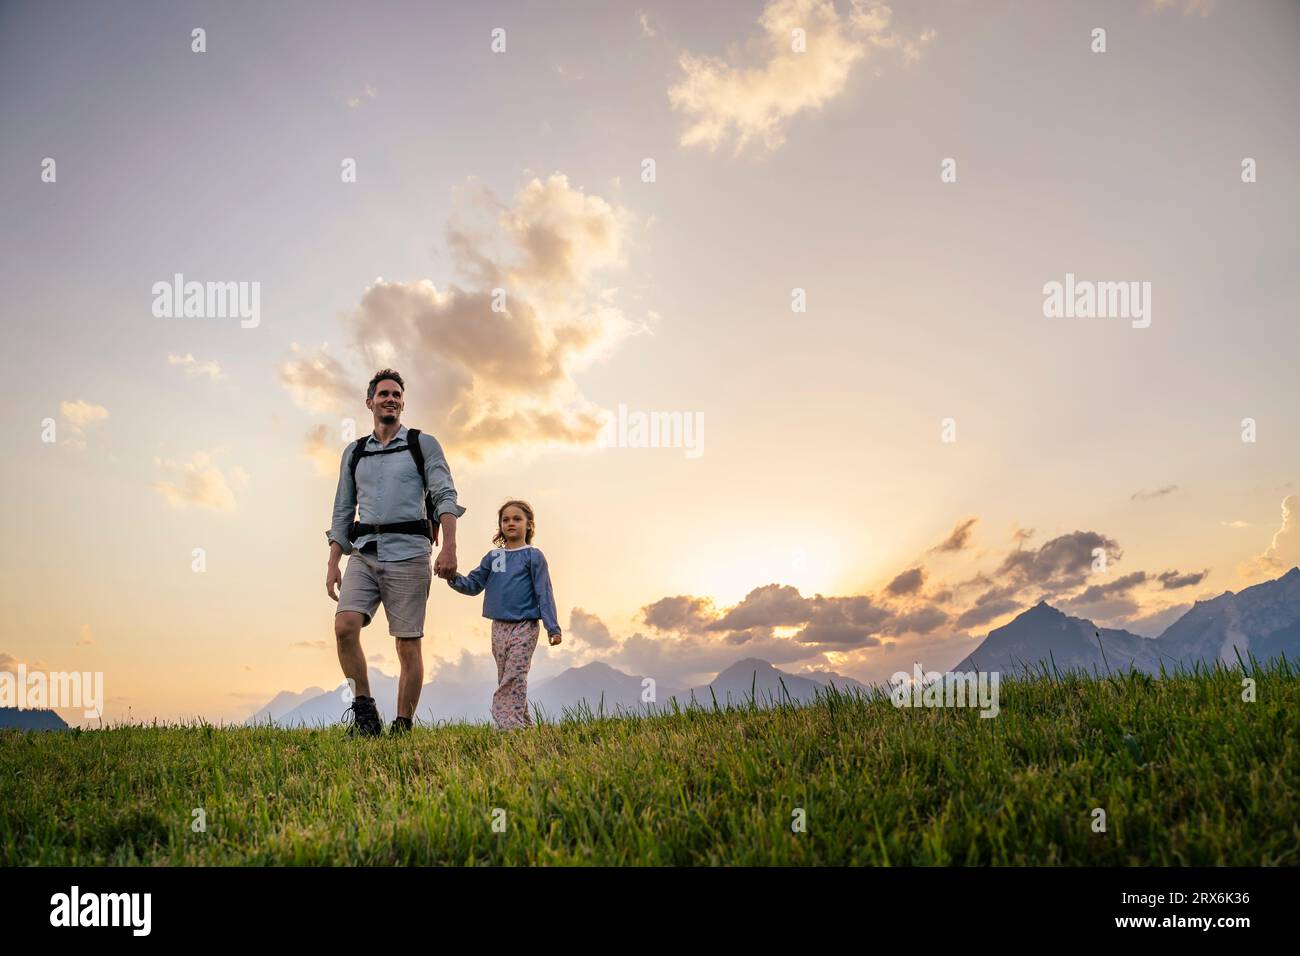 Daughter and father holding hands and walking on grass Stock Photo